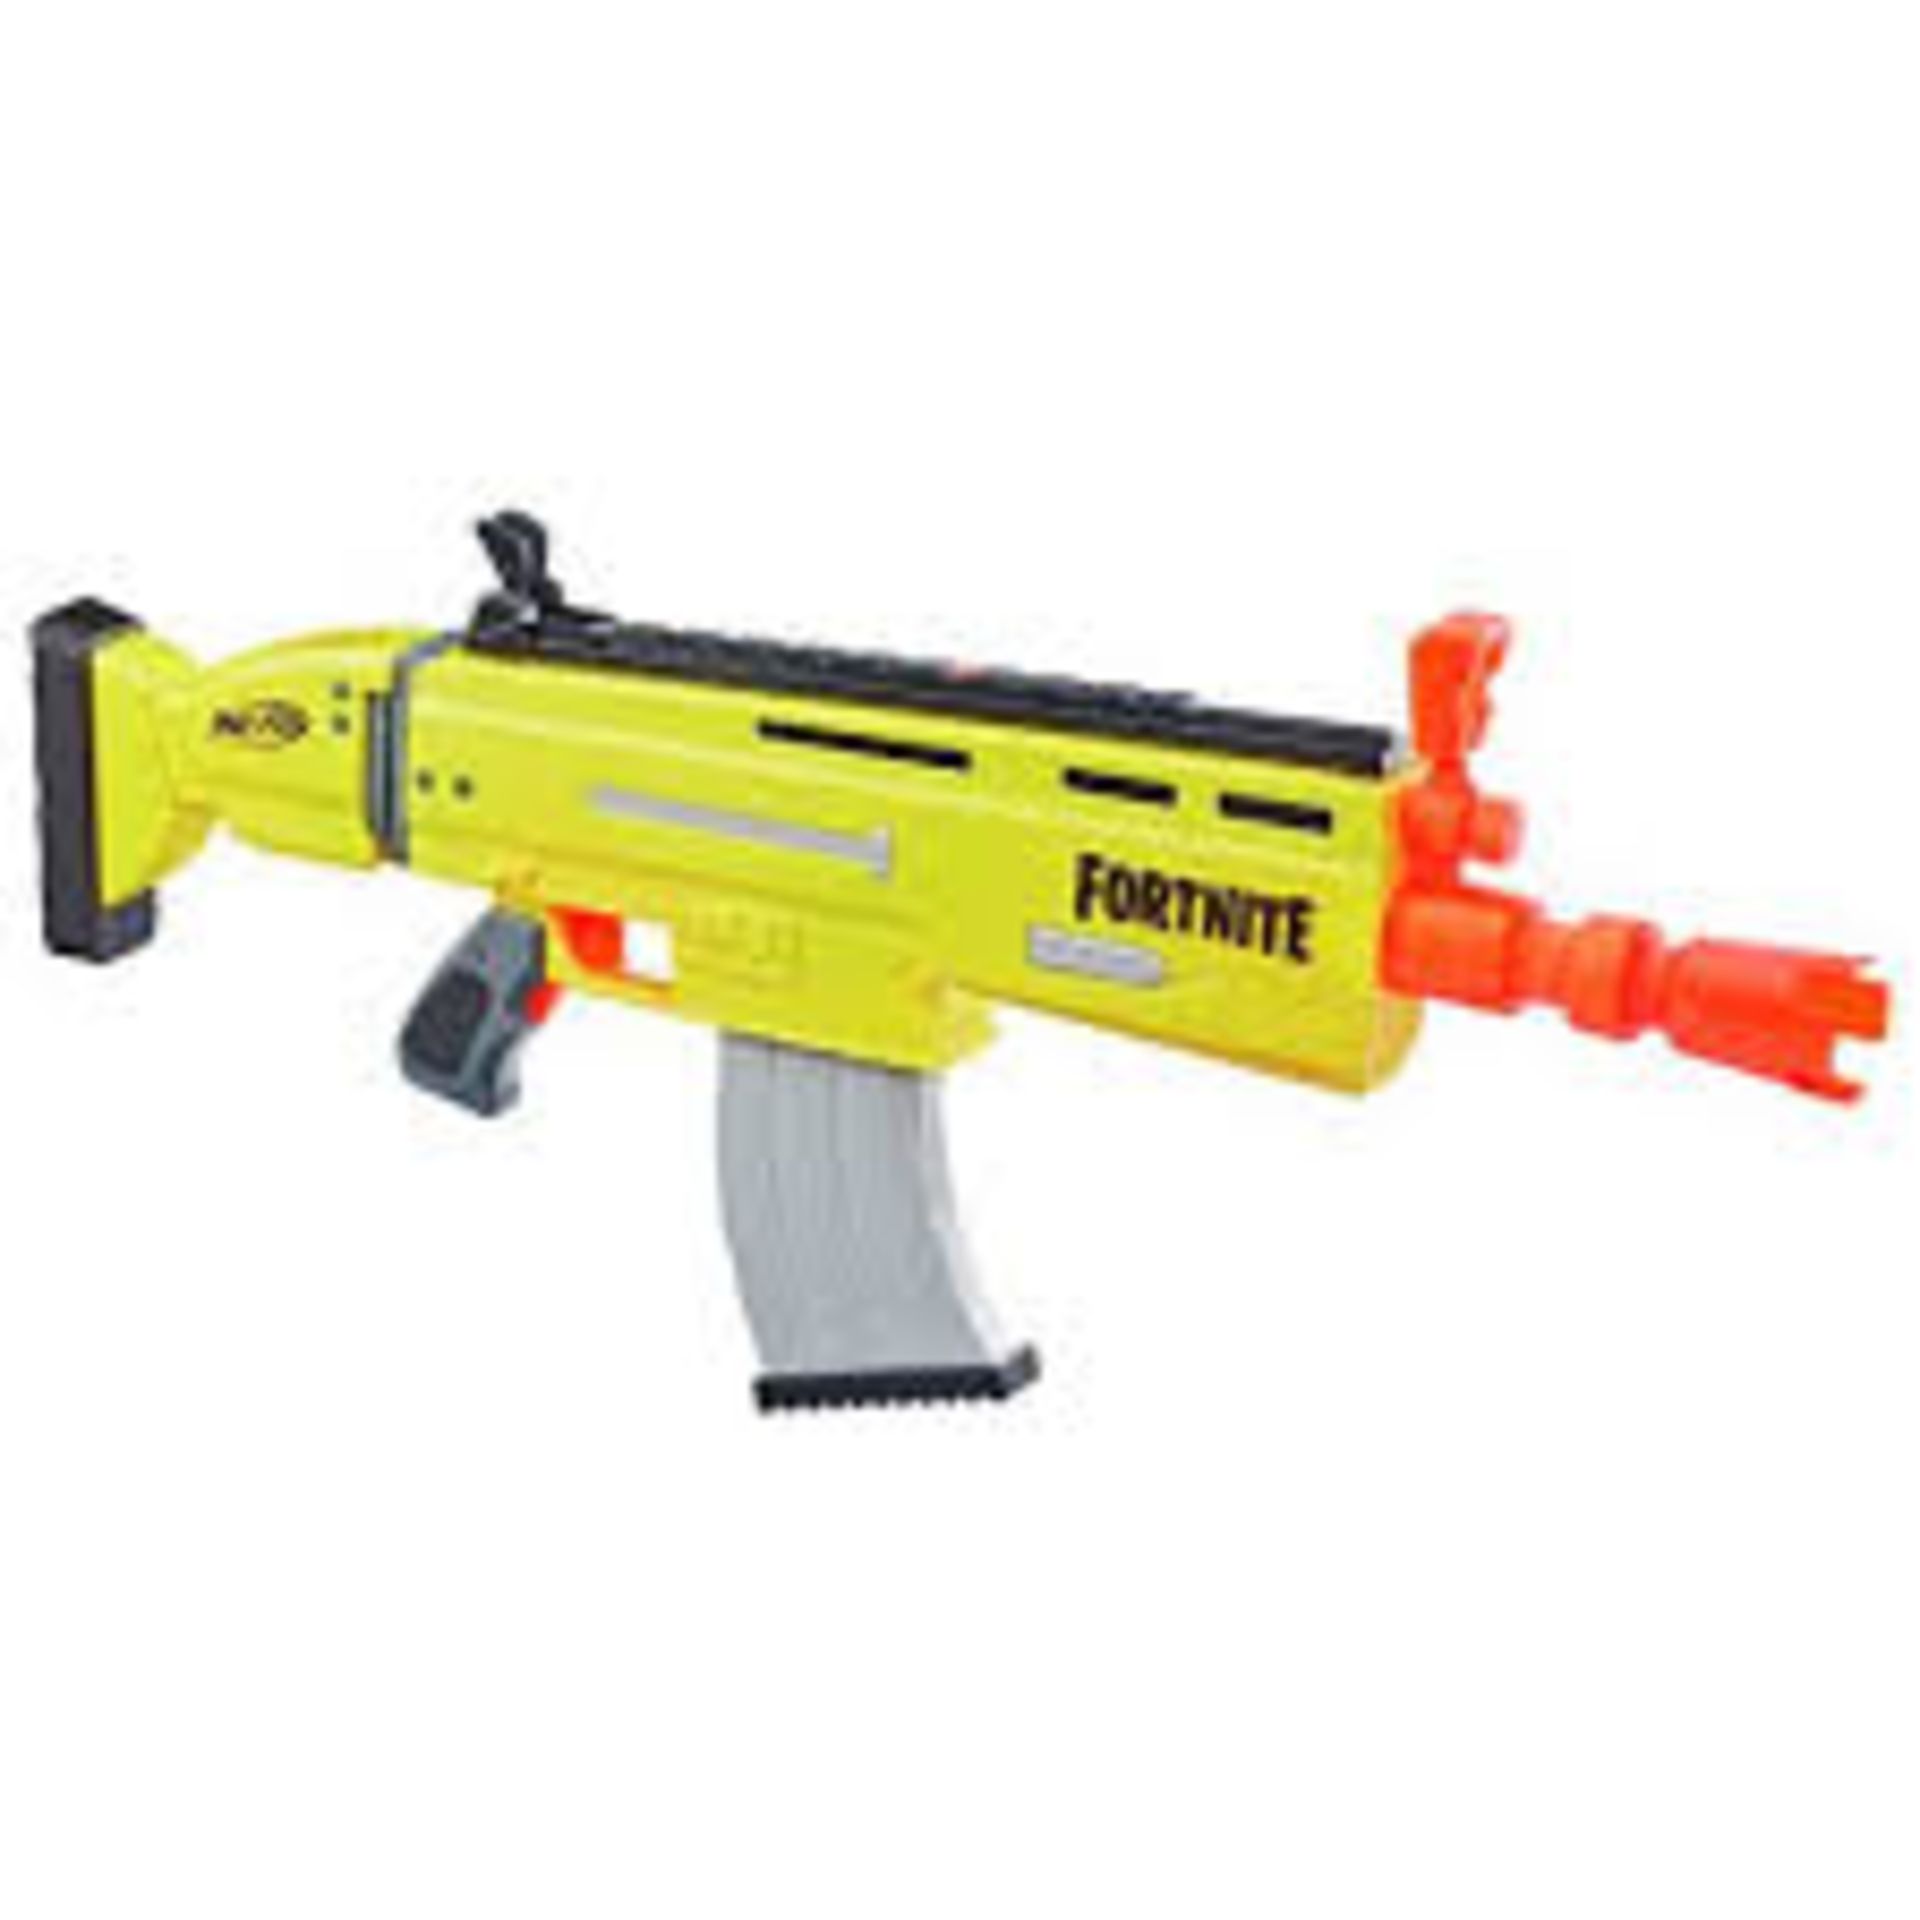 Boxed Fortnite AR-L Dart Blaster RRP £50 (RET00353432) (Public Viewing and Appraisals Available)